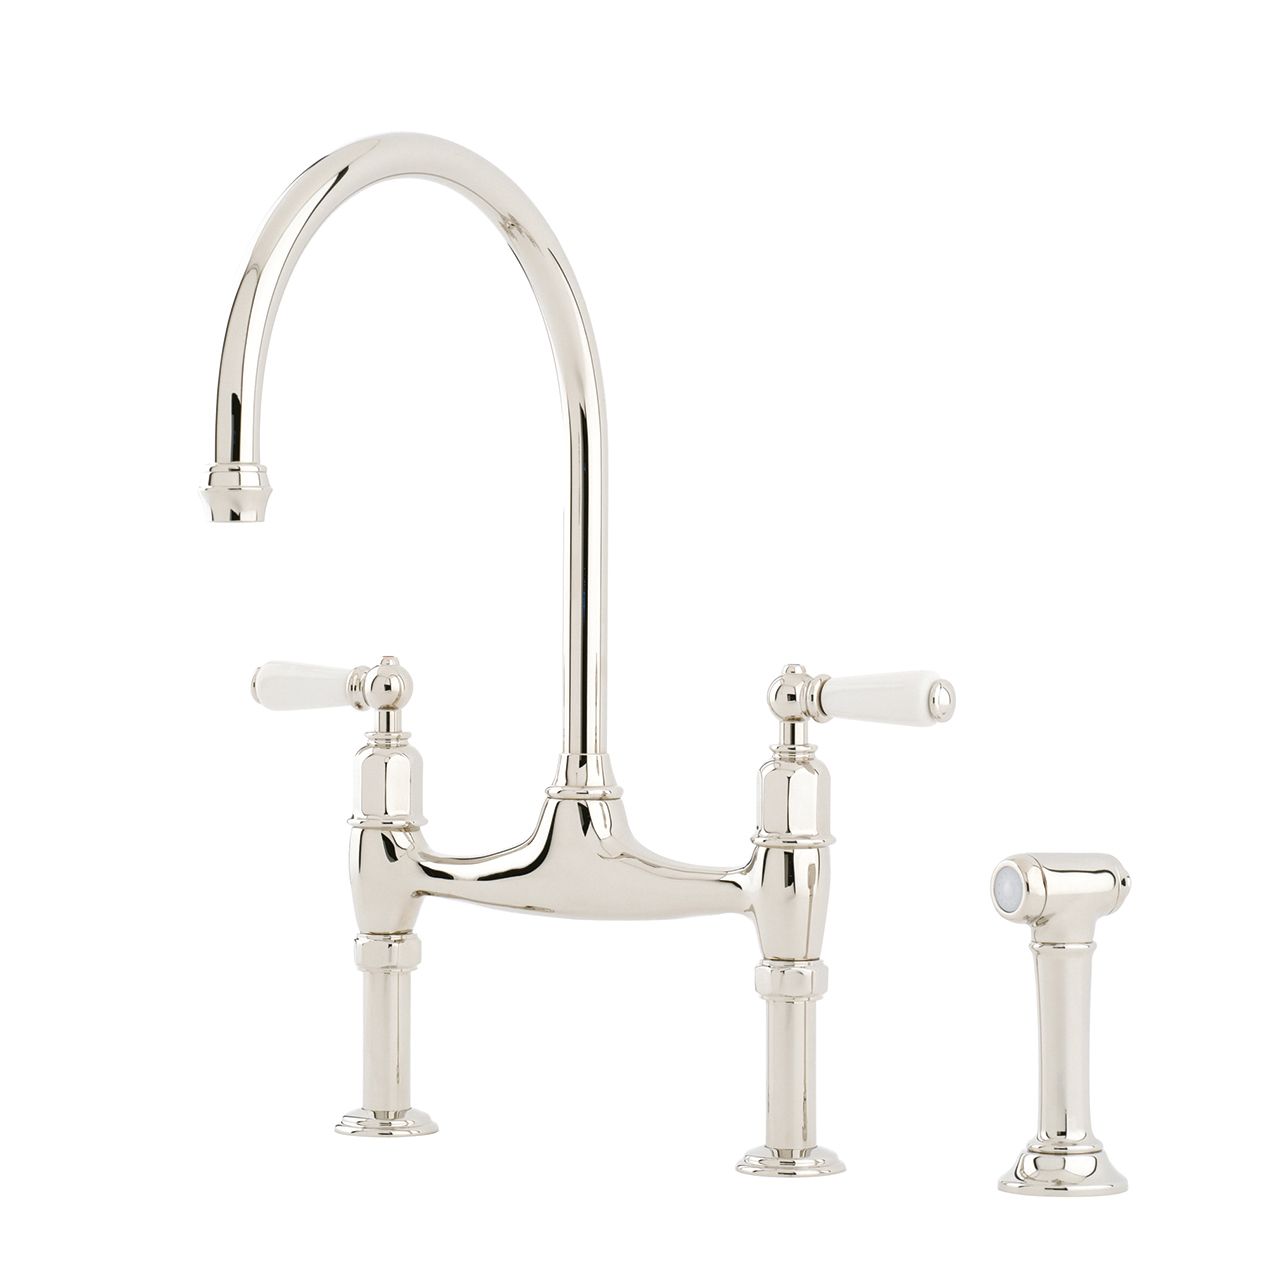 Ionian Deck Mixer with Lever Porcelain handles with Rinse in Polished Chrome – Perrin & Rowe